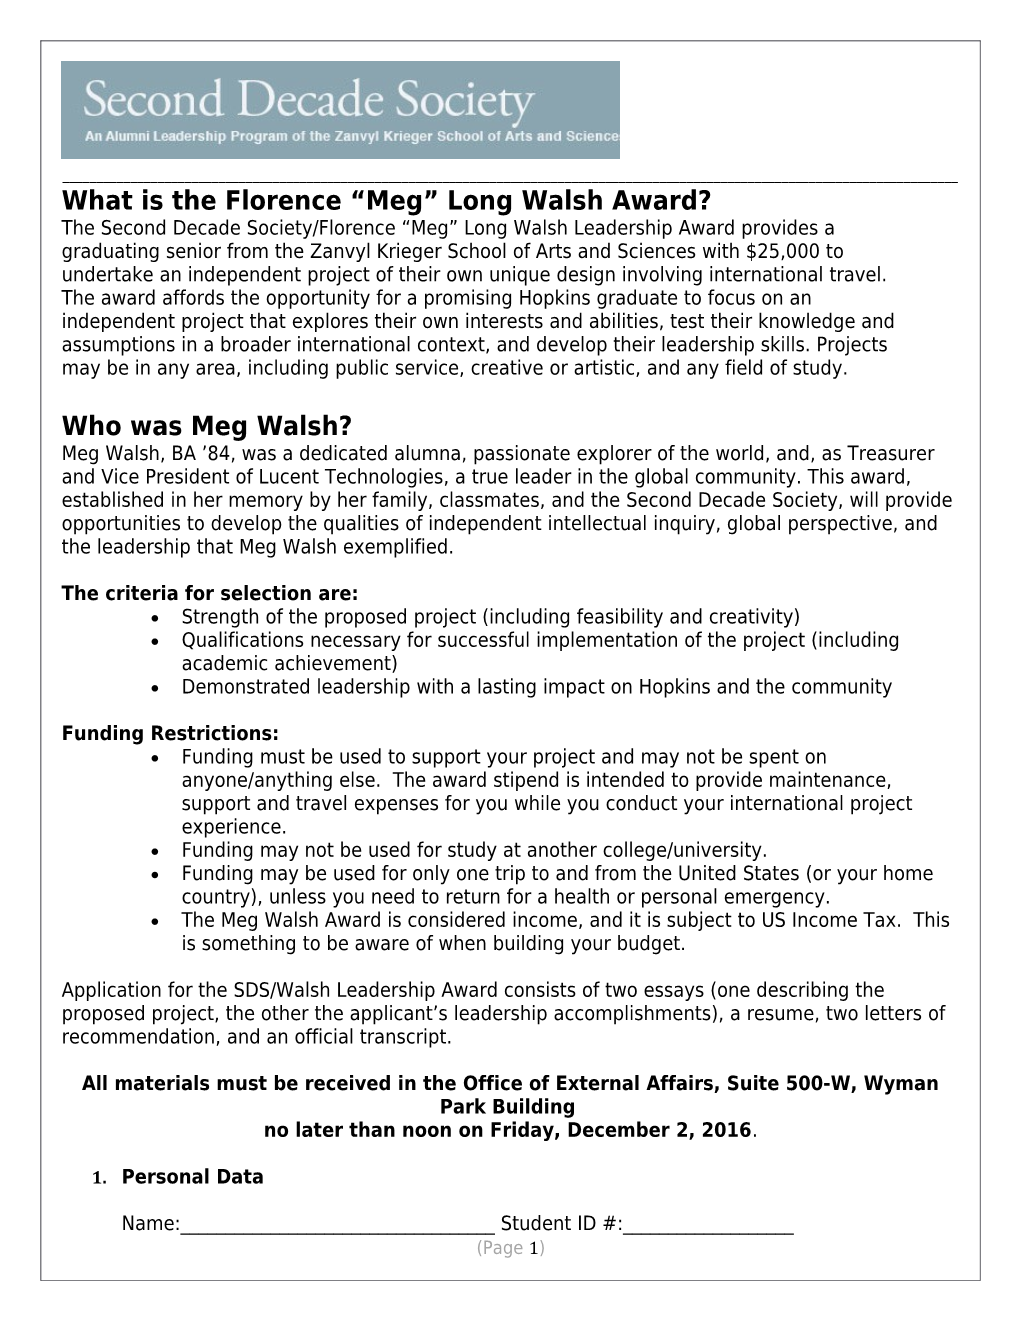 What Is the Florence Meg Long Walsh Award?